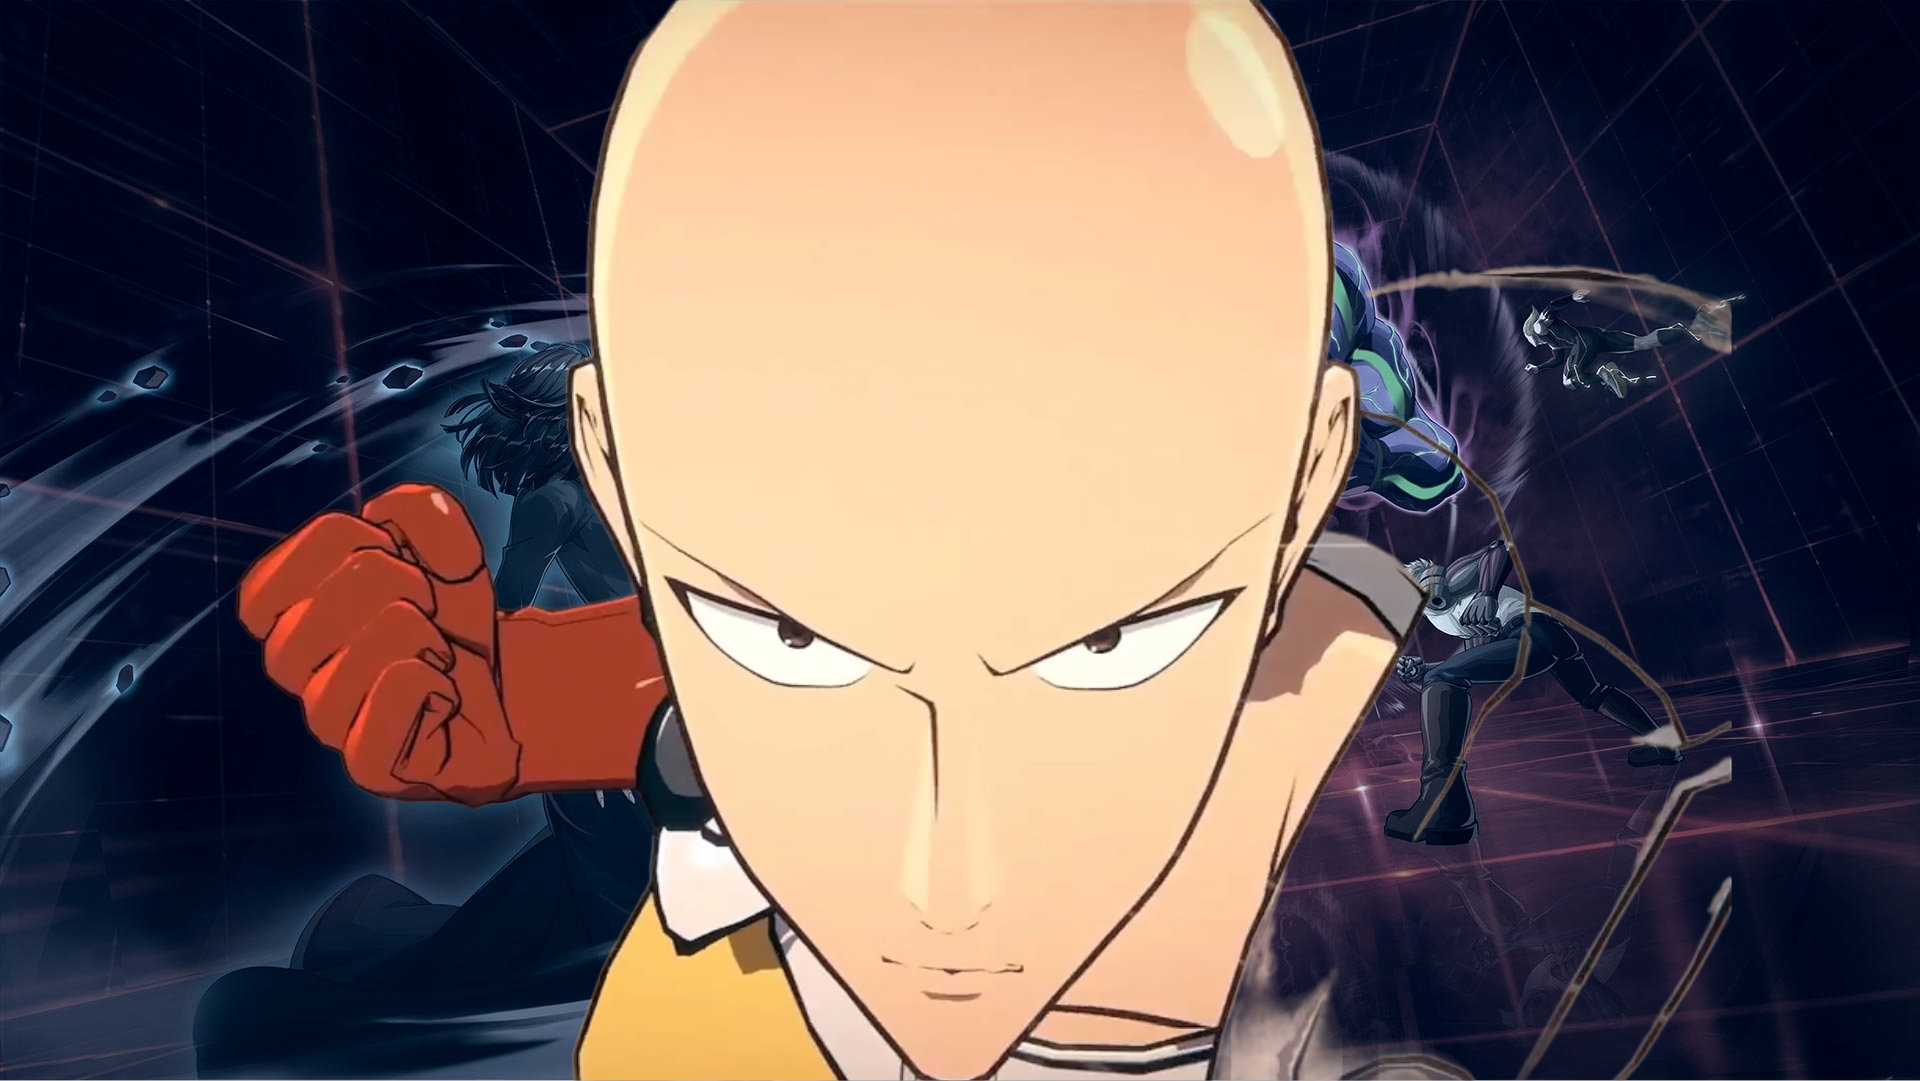 One Punch Man - Season 2 Official Trailer 